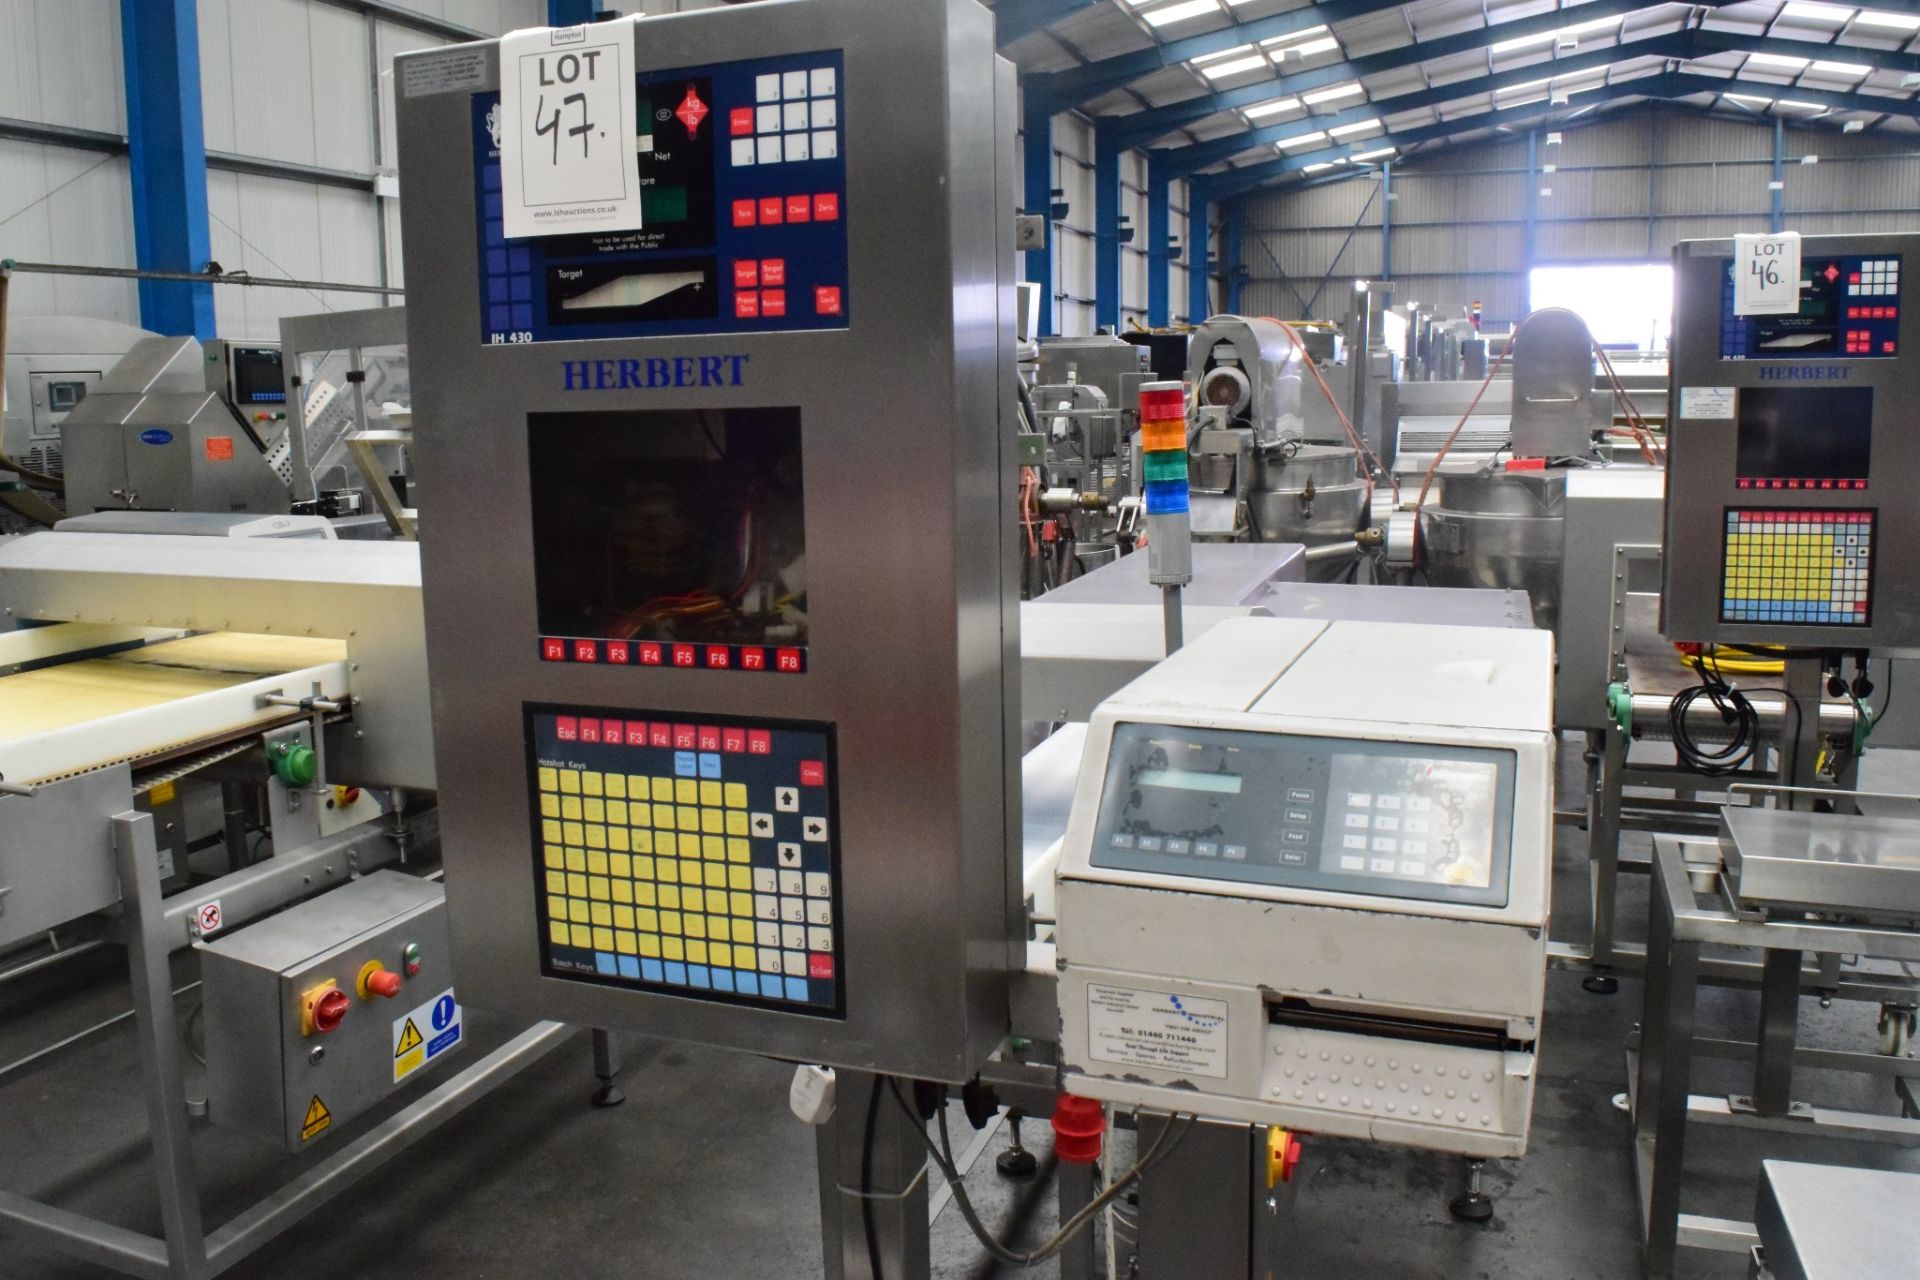 Herbert HI430 scale with Intermec Easy Coder 501E, on stand, platform size: 400 x 300, single phase,